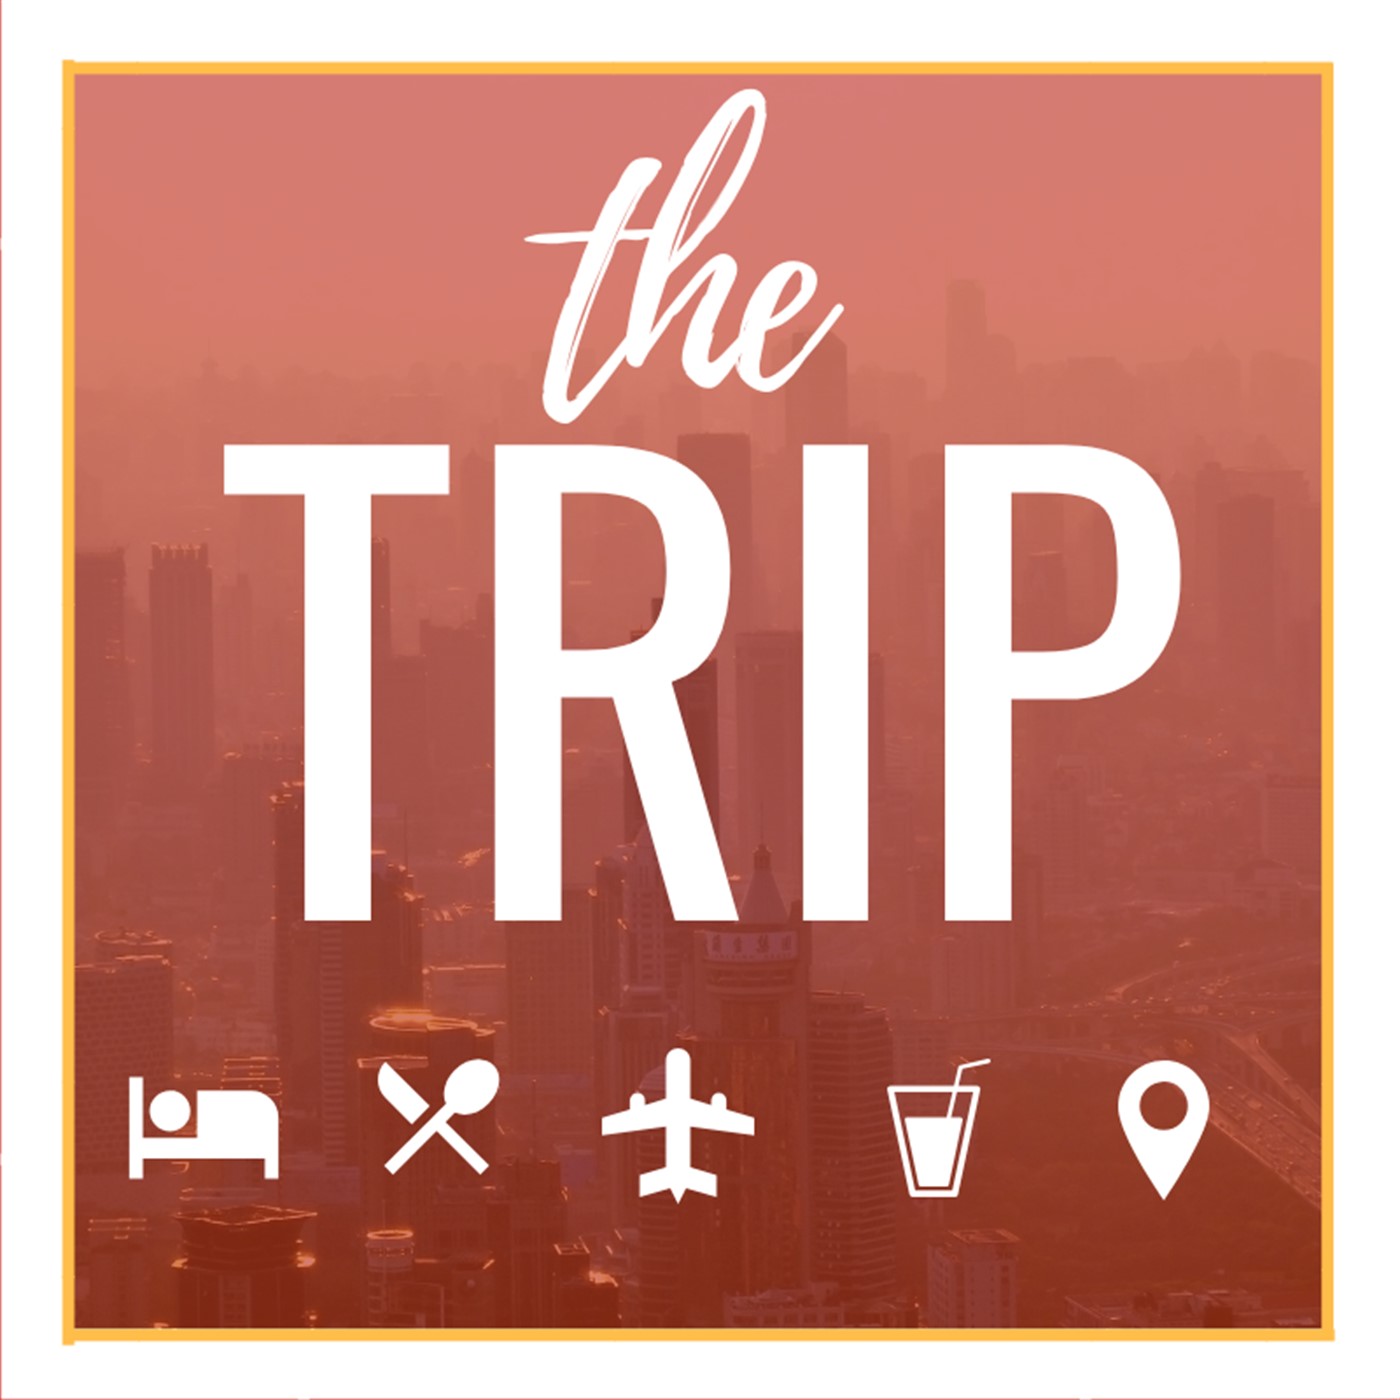 Toronto Weekend Travel Guide: With Lauren Morley from The Author Podcast